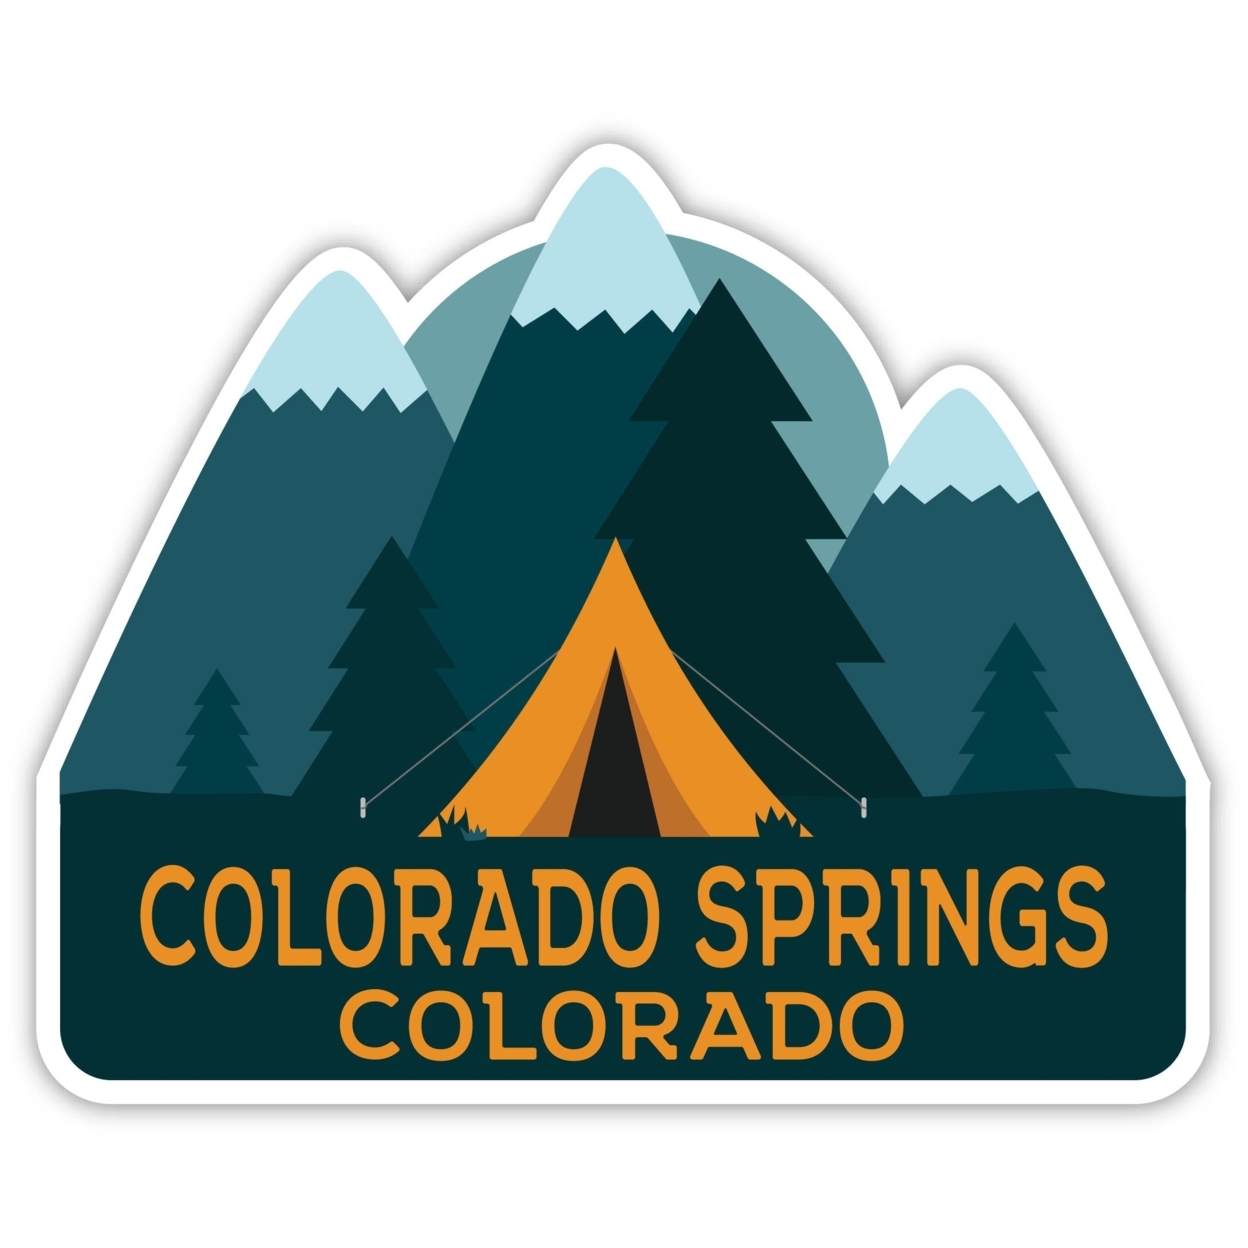 Colorado Springs Colorado Souvenir Decorative Stickers (Choose Theme And Size) - 4-Pack, 2-Inch, Great Outdoors